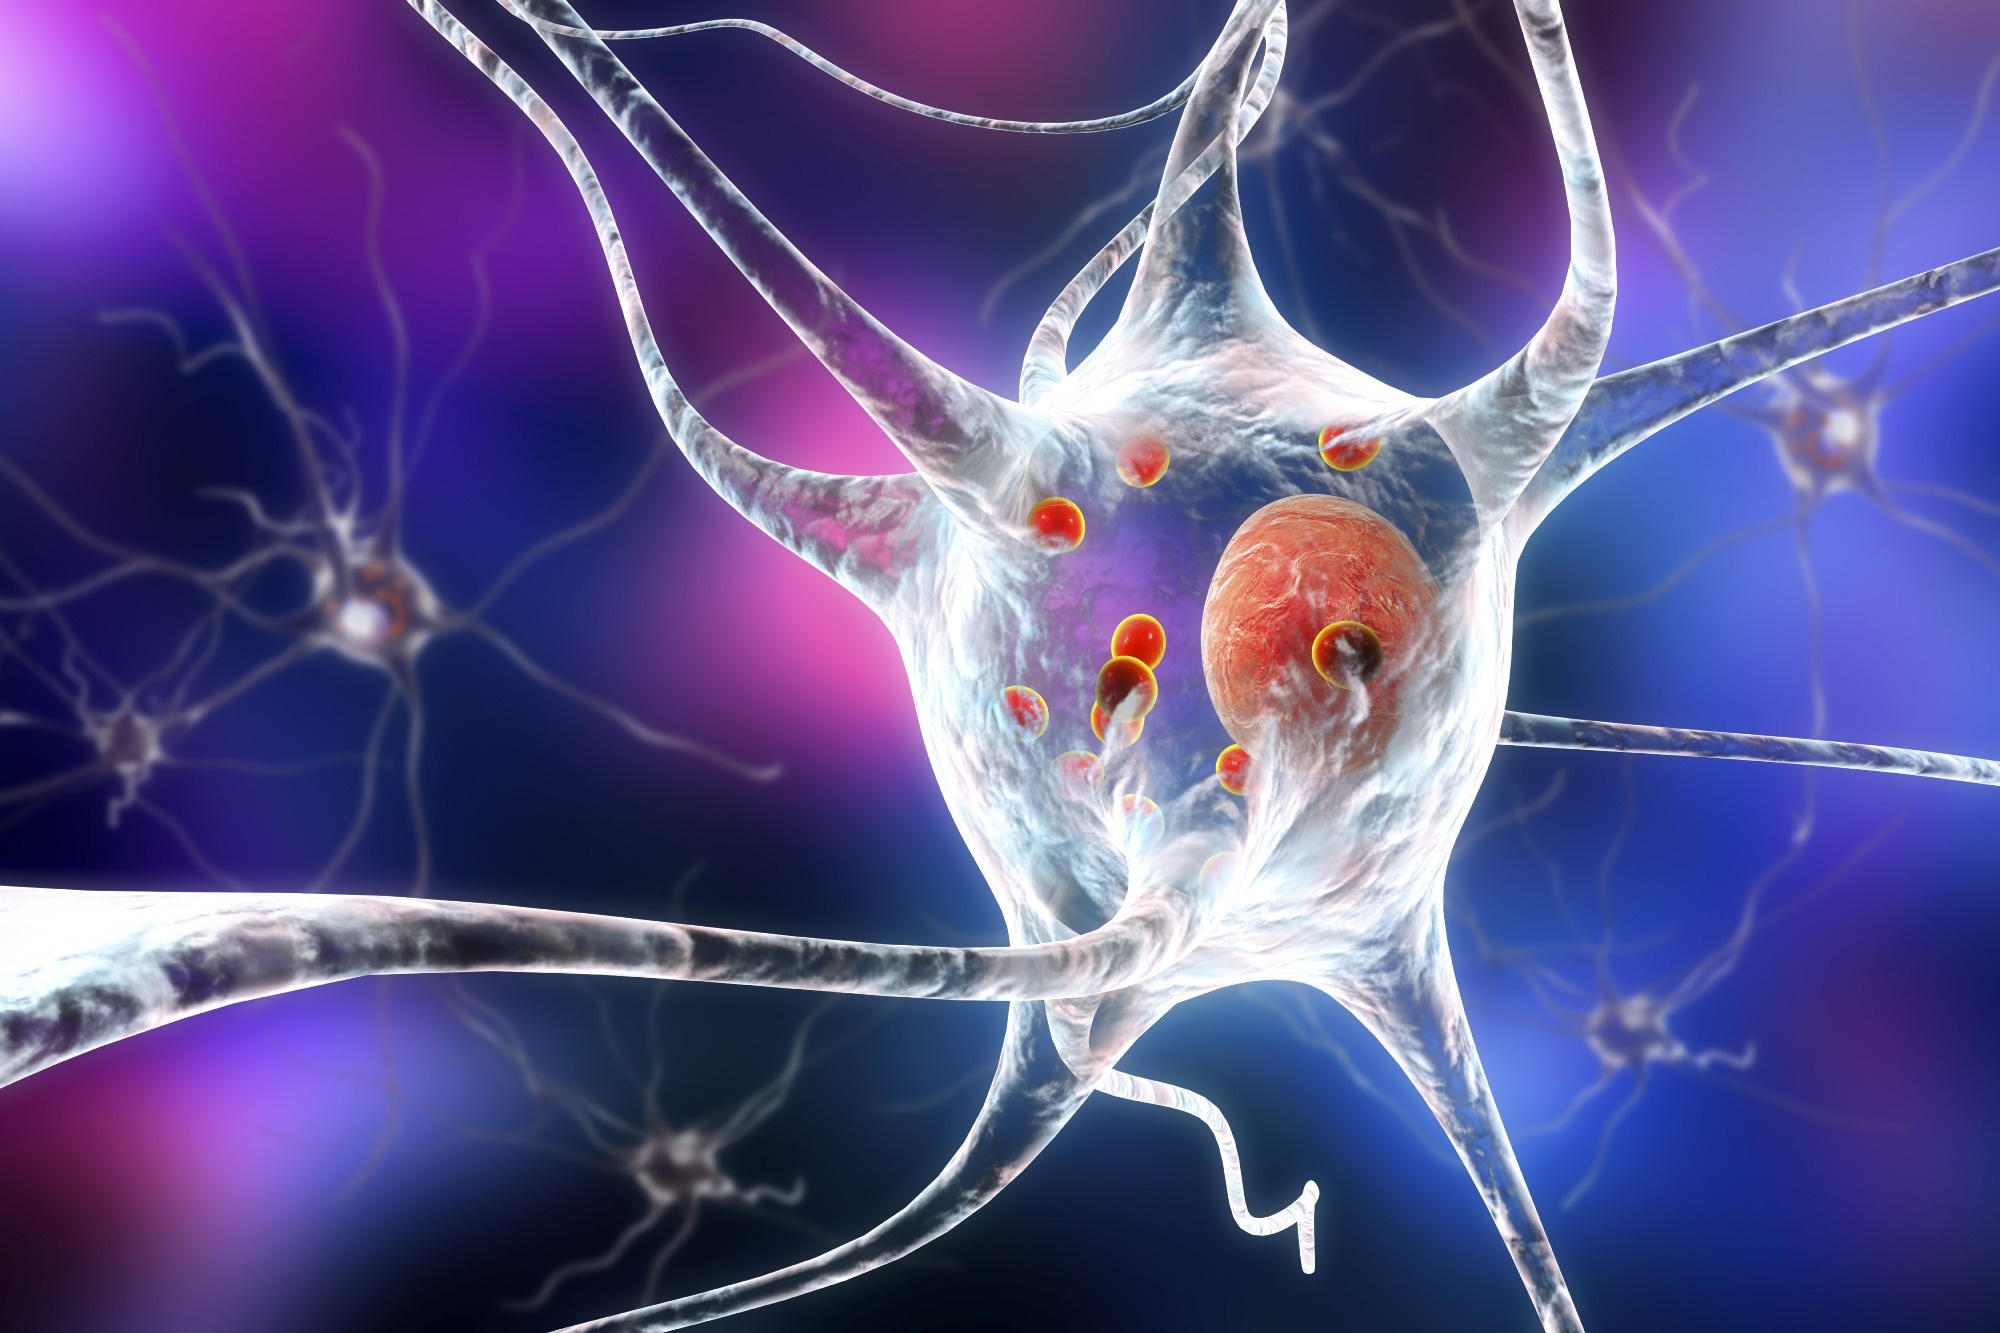 Study: Extracellular Vesicles, Cell-Penetrating Peptides and miRNAs as Future Novel Therapeutic Interventions for Parkinson’s and Alzheimer’s Disease. Image Credit: Kateryna Kon/Shutterstock